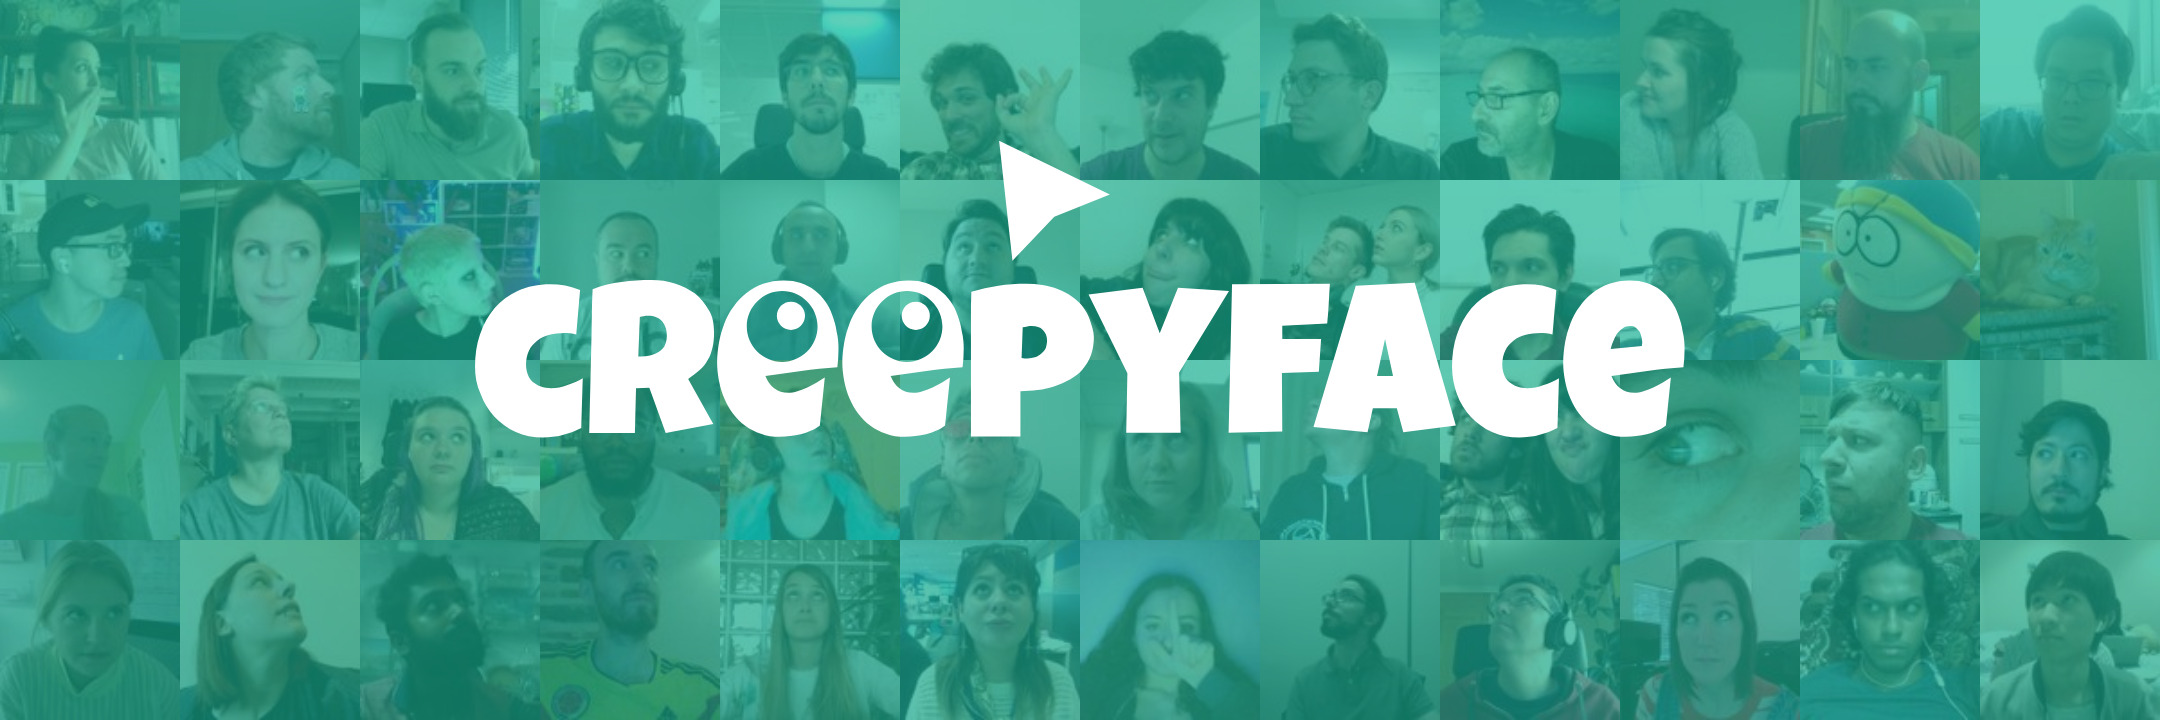 The Creepyface logo with a background full of faces looking at the pointer